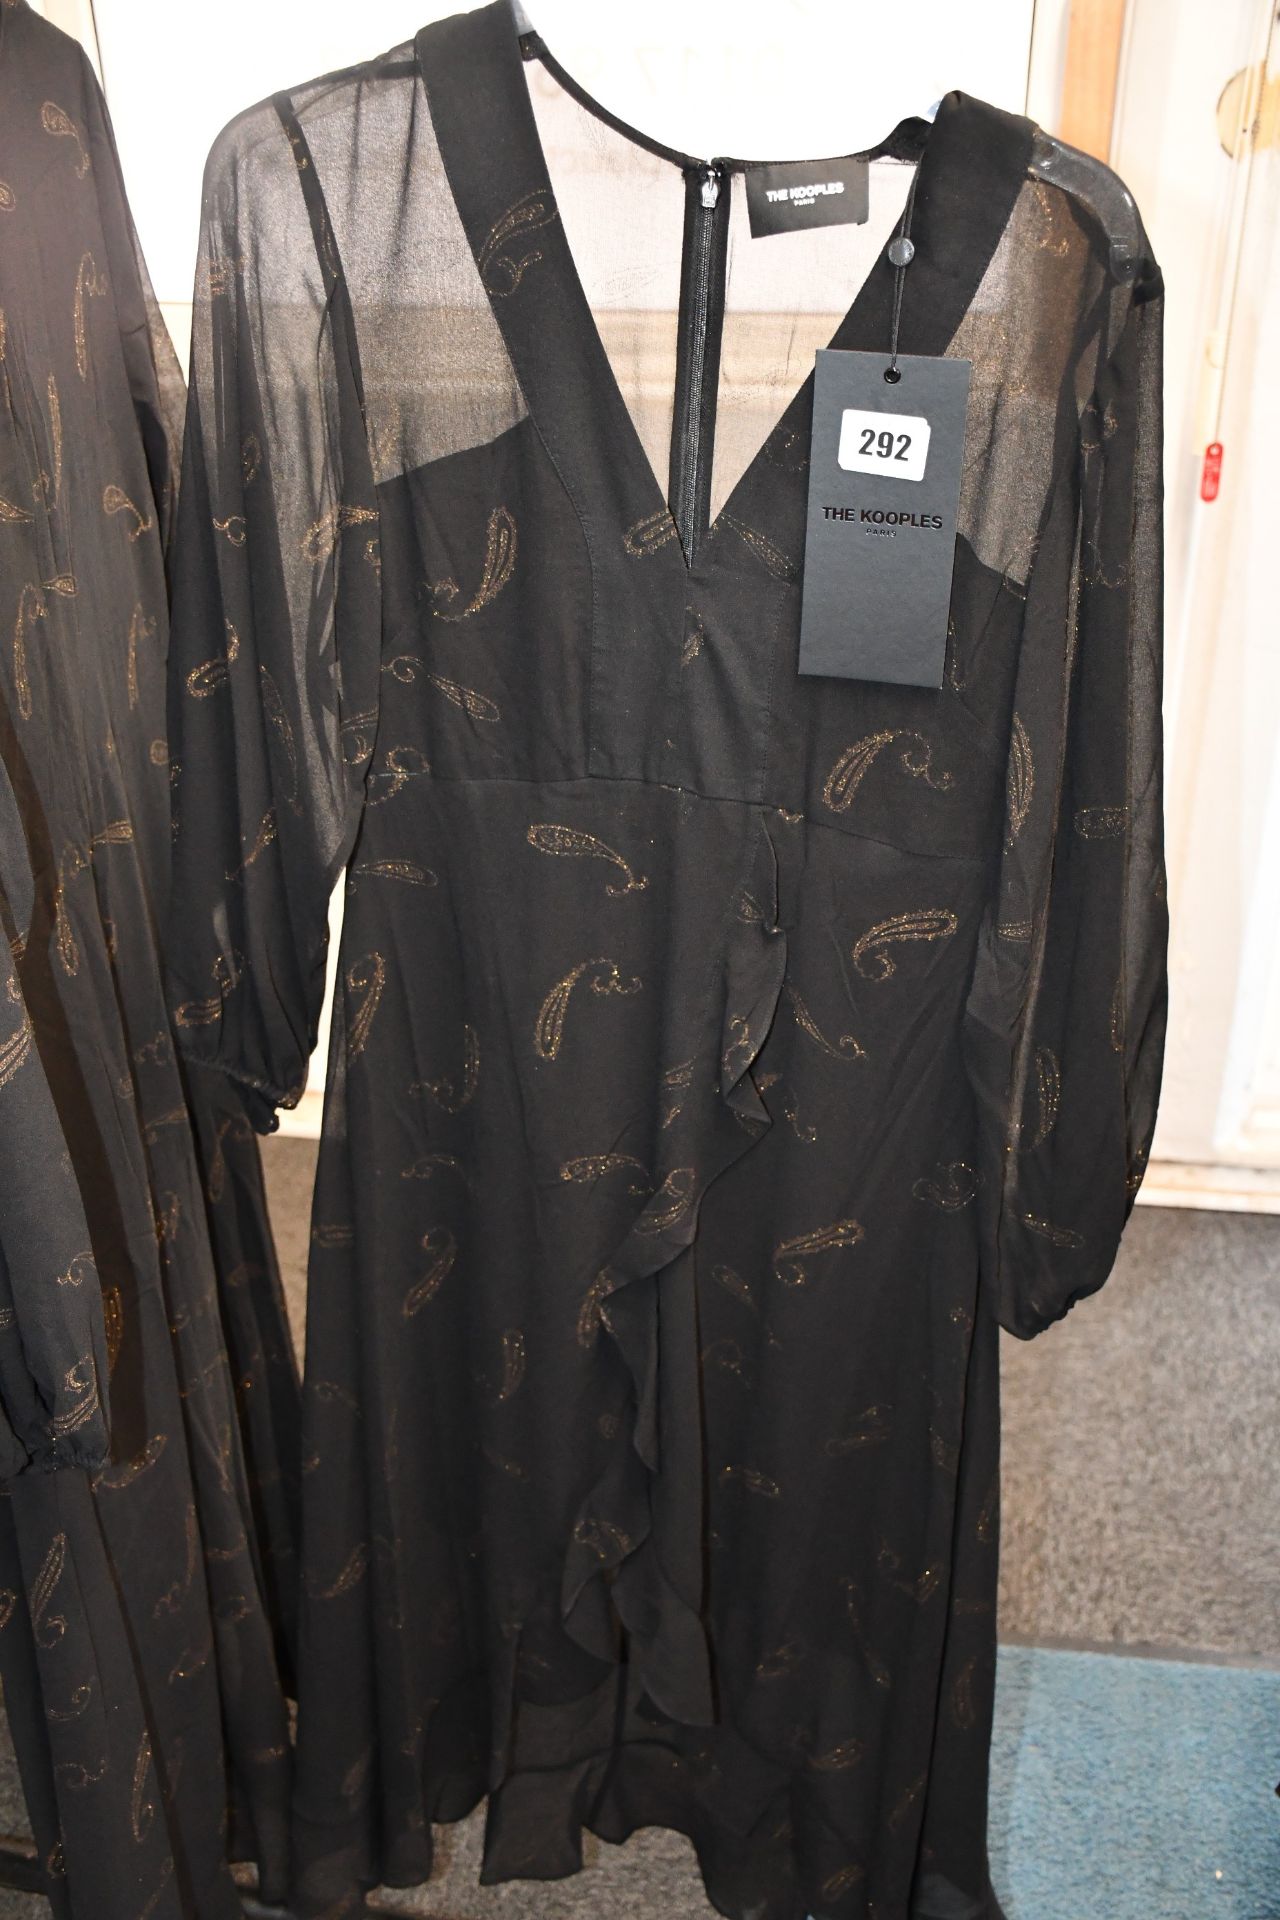 An as new The Kooples Flying Paisley dress (Size 2 - RRP £318).